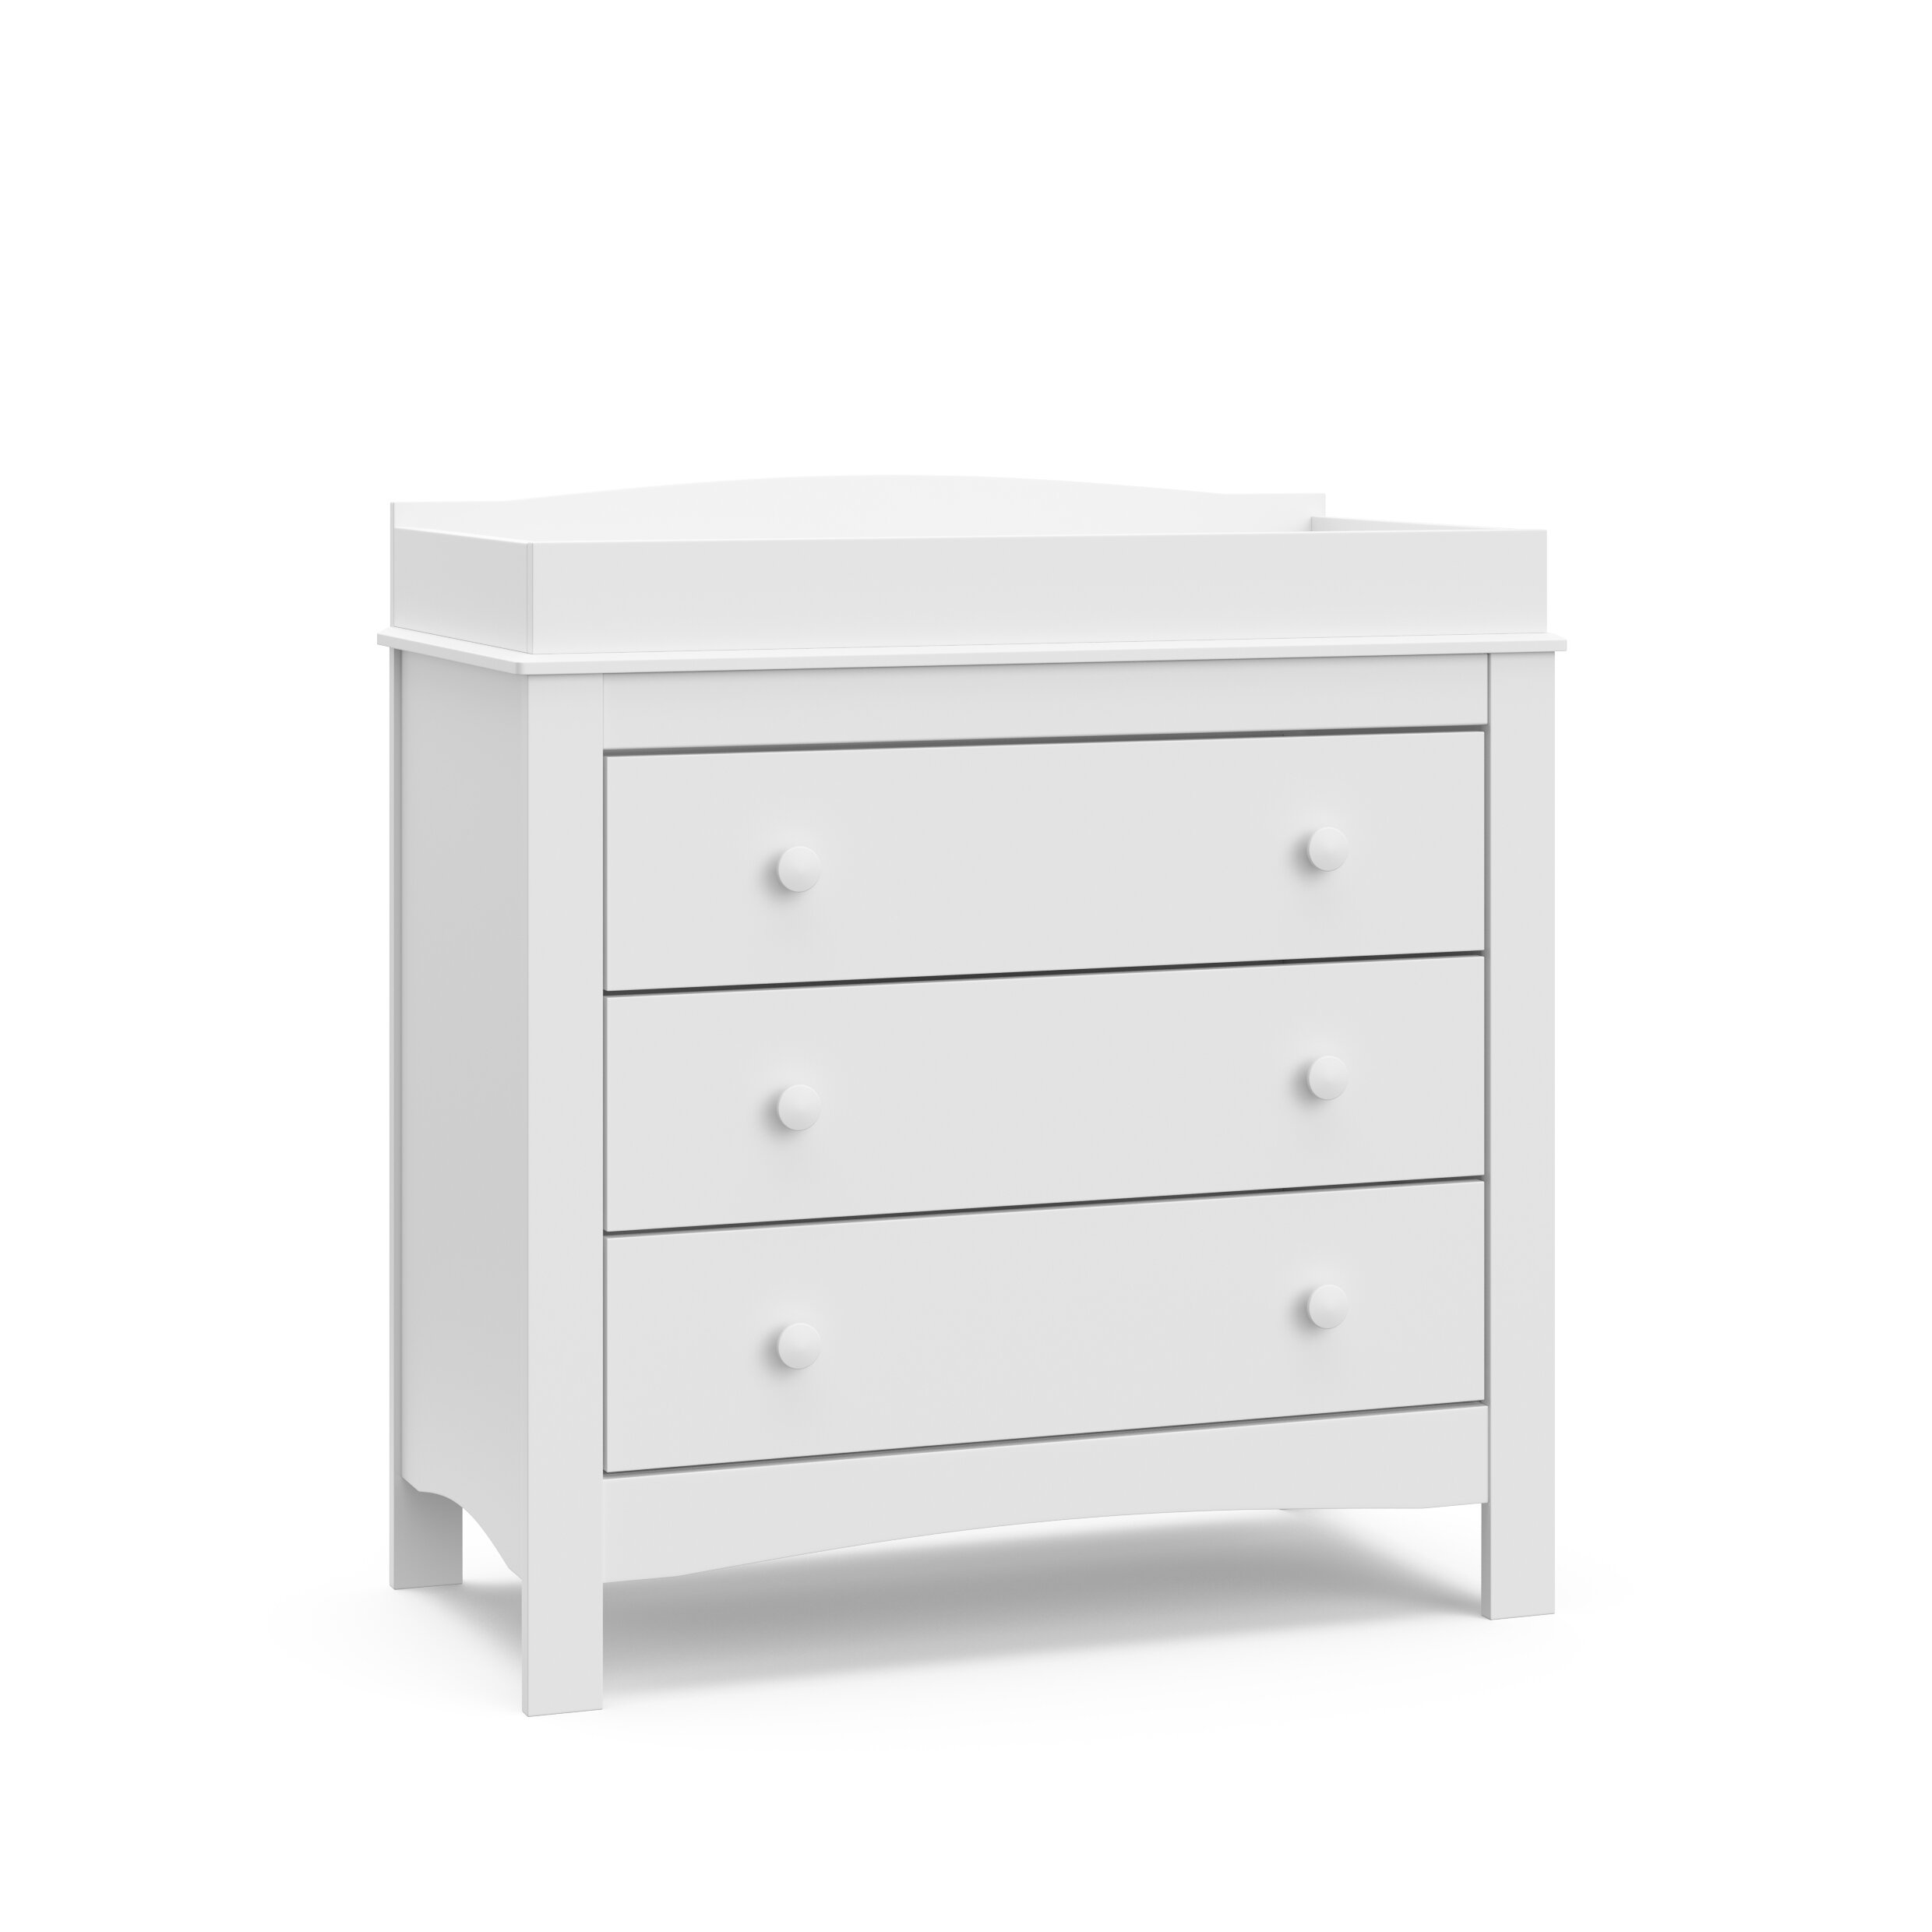 Chest of Drawers for Bedroom with 3 Drawers Espresso – Dresser for Kids Bedroom Nursery Dresser Organizer Graco Noah 3 Drawer Chest with Changing Topper Universal Design for Children’s Bedroom 